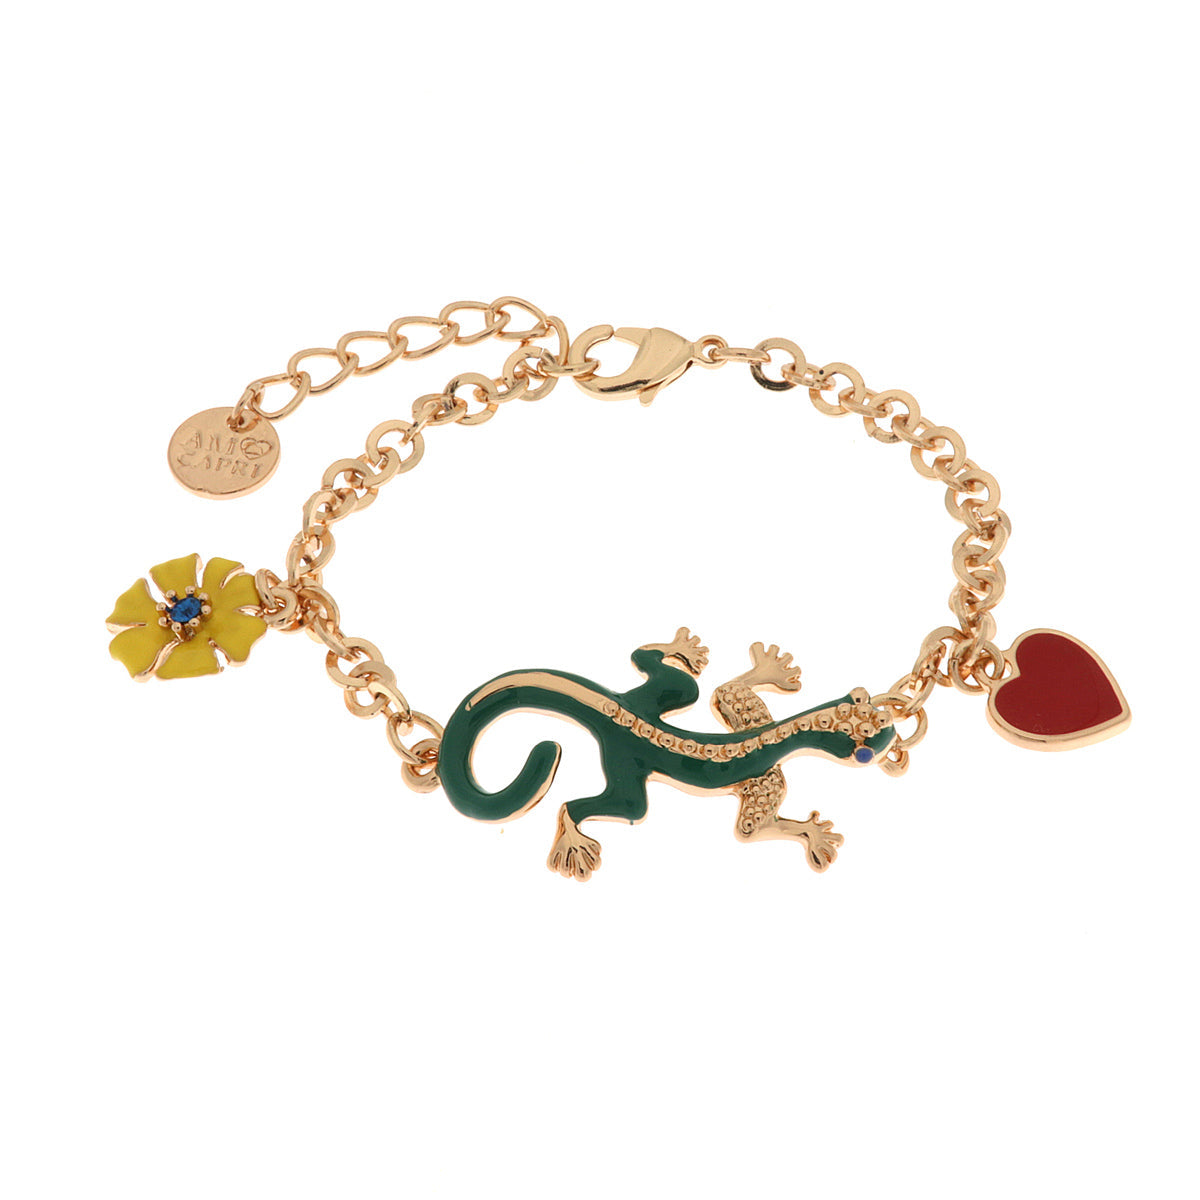 Metal bracelet with green geco, red heart and yellow flower